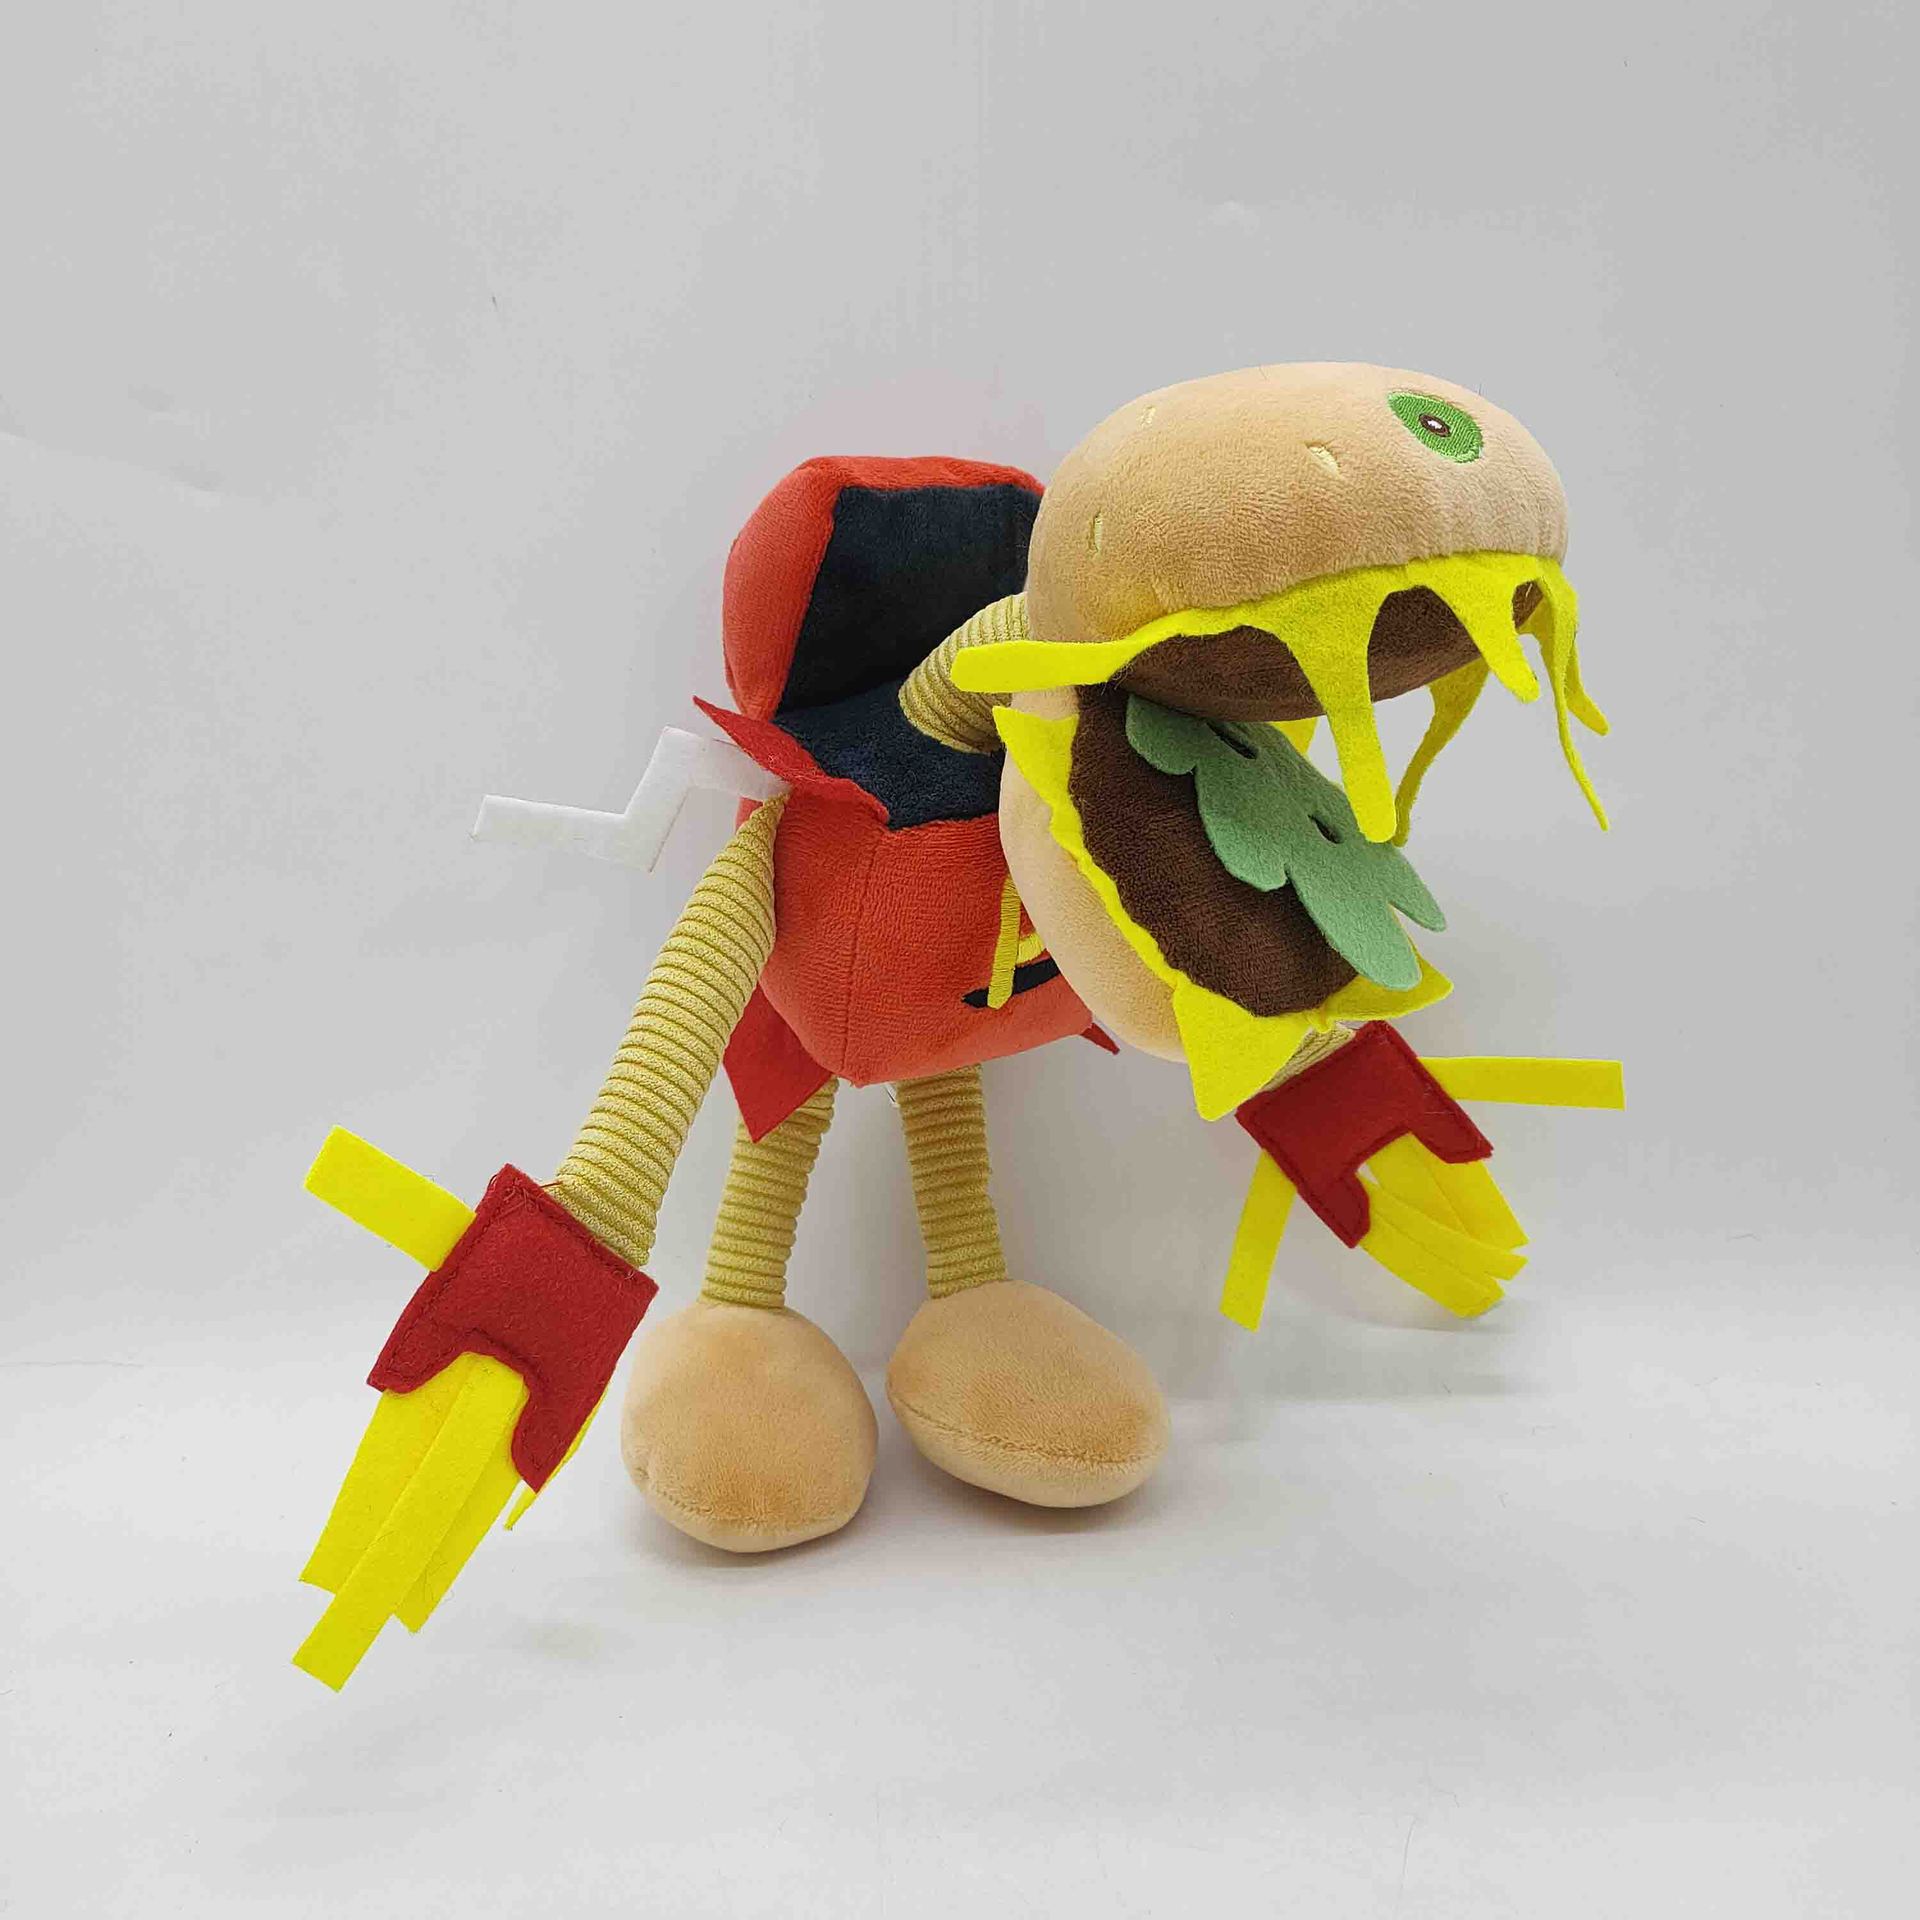 Boxy Boo Toy Hamburger Cartoon Game Peripheral Dolls Red Robot Filled Plush Dolls Holiday Gift Collection 2 - Boxy Boo Plush